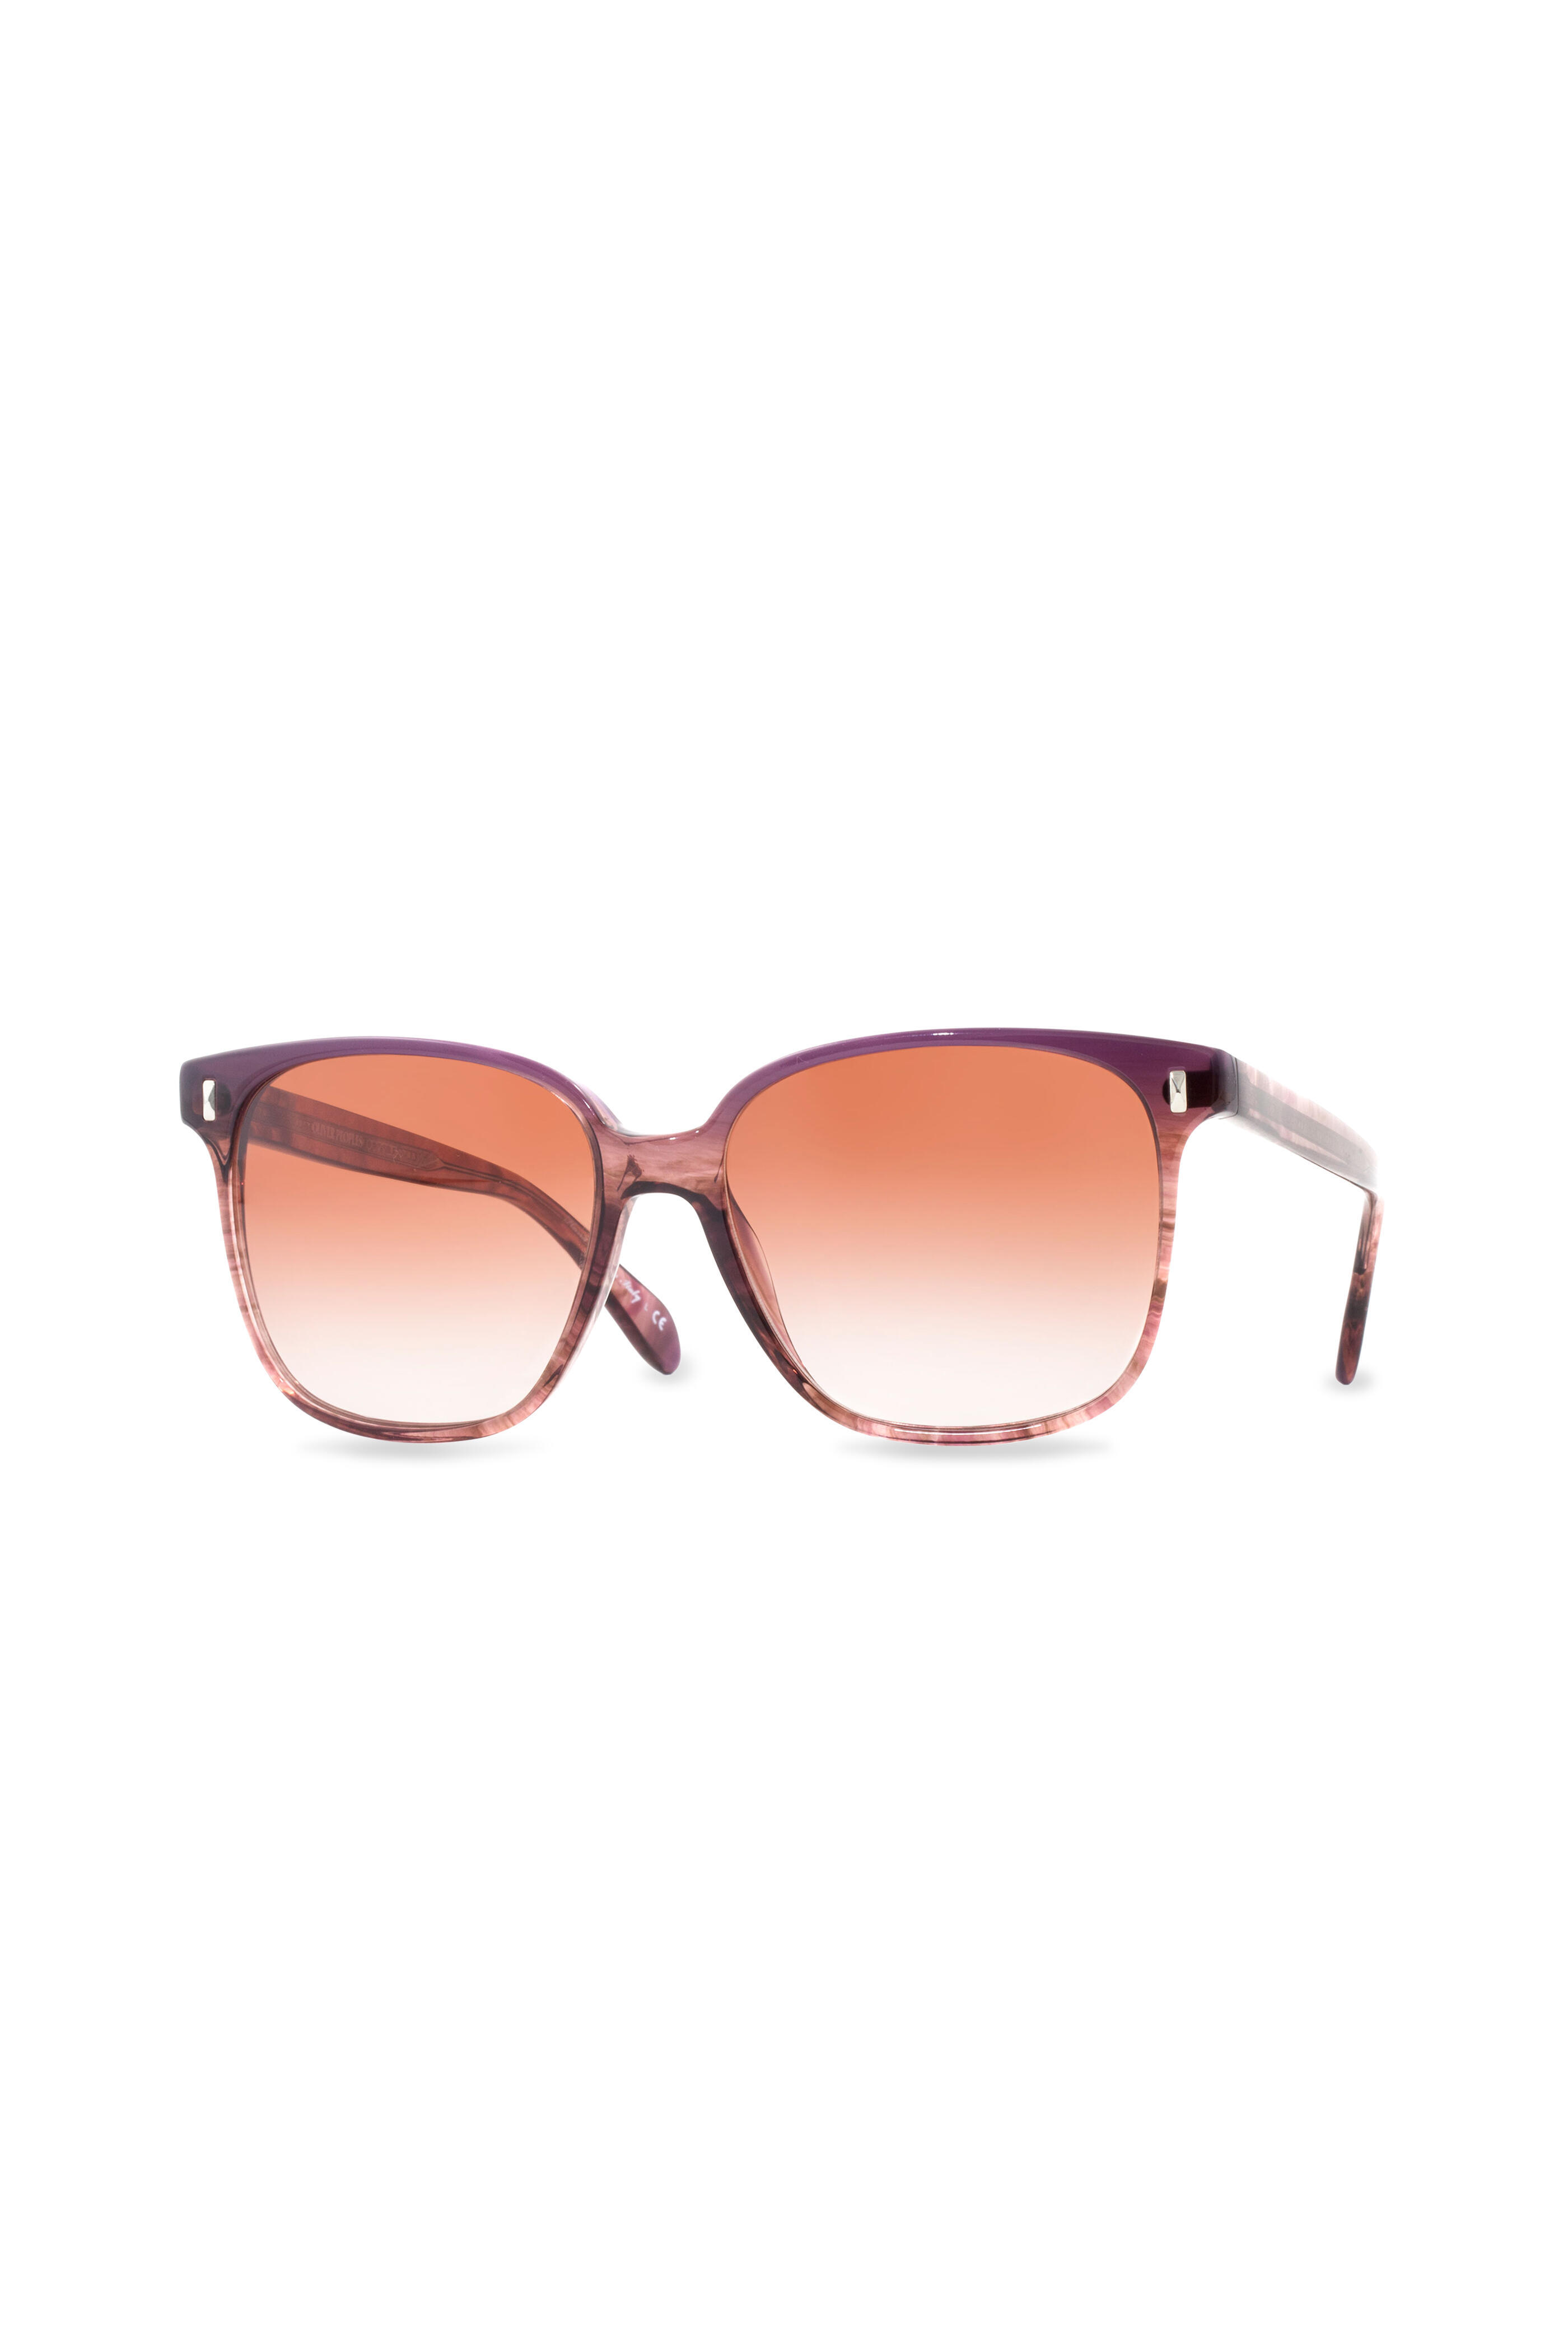 Oliver Peoples - Marmont 57 Faded Fig & Sonoma Sunglasses